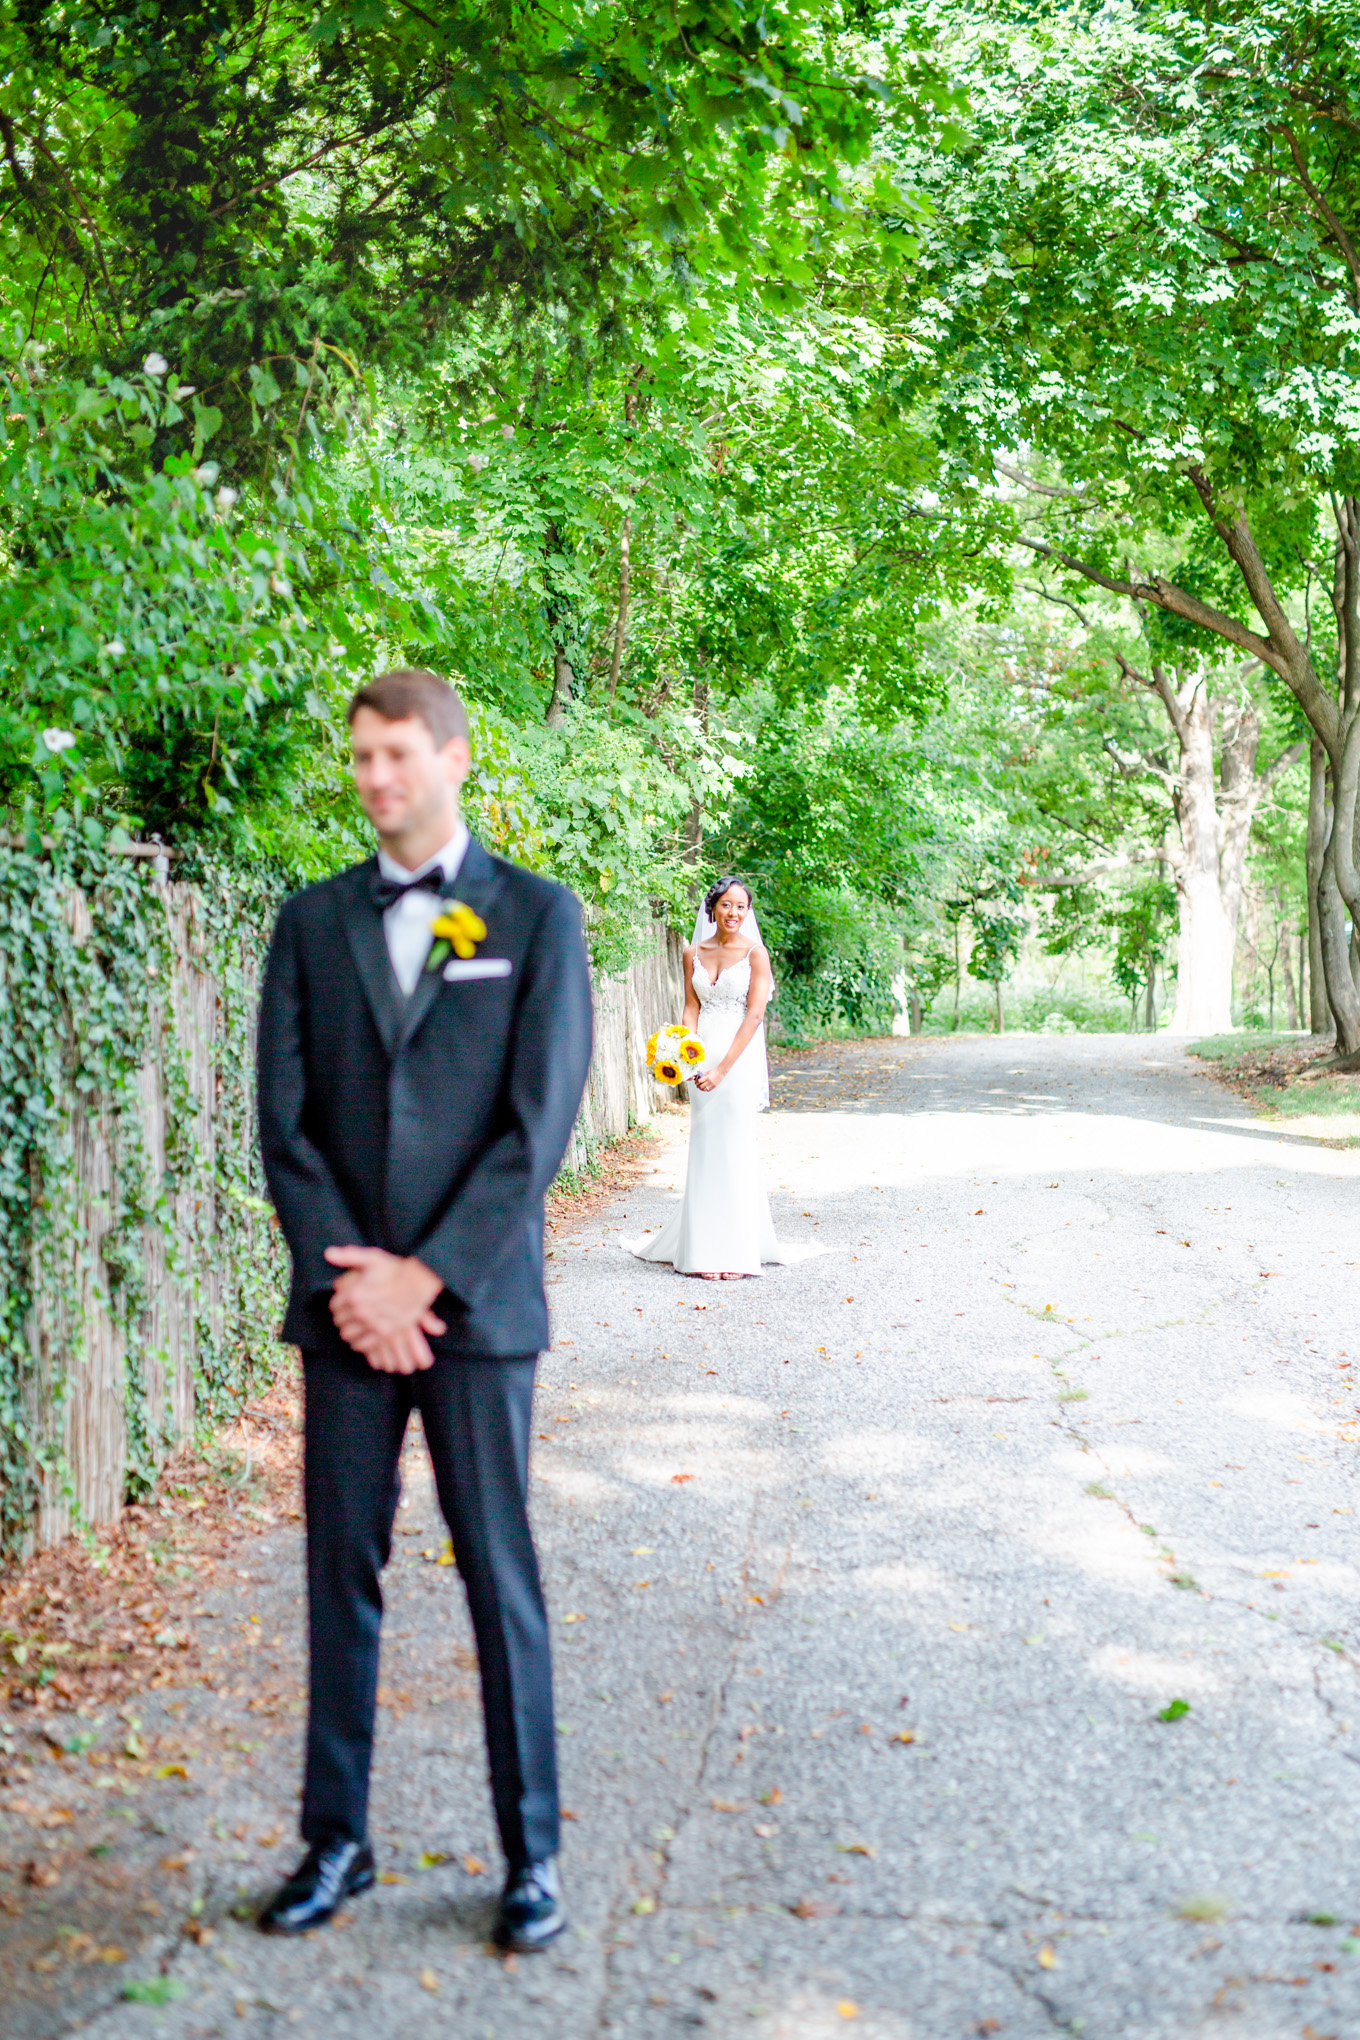 summer mansion at valley country club wedding, Maryland wedding, MD wedding, Maryland wedding photographer, summer wedding, summer wedding inspiration, Baltimore wedding photographer, DC wedding photographer, country club wedding, yellow aesthetic, Rachel E.H. Photography, first look